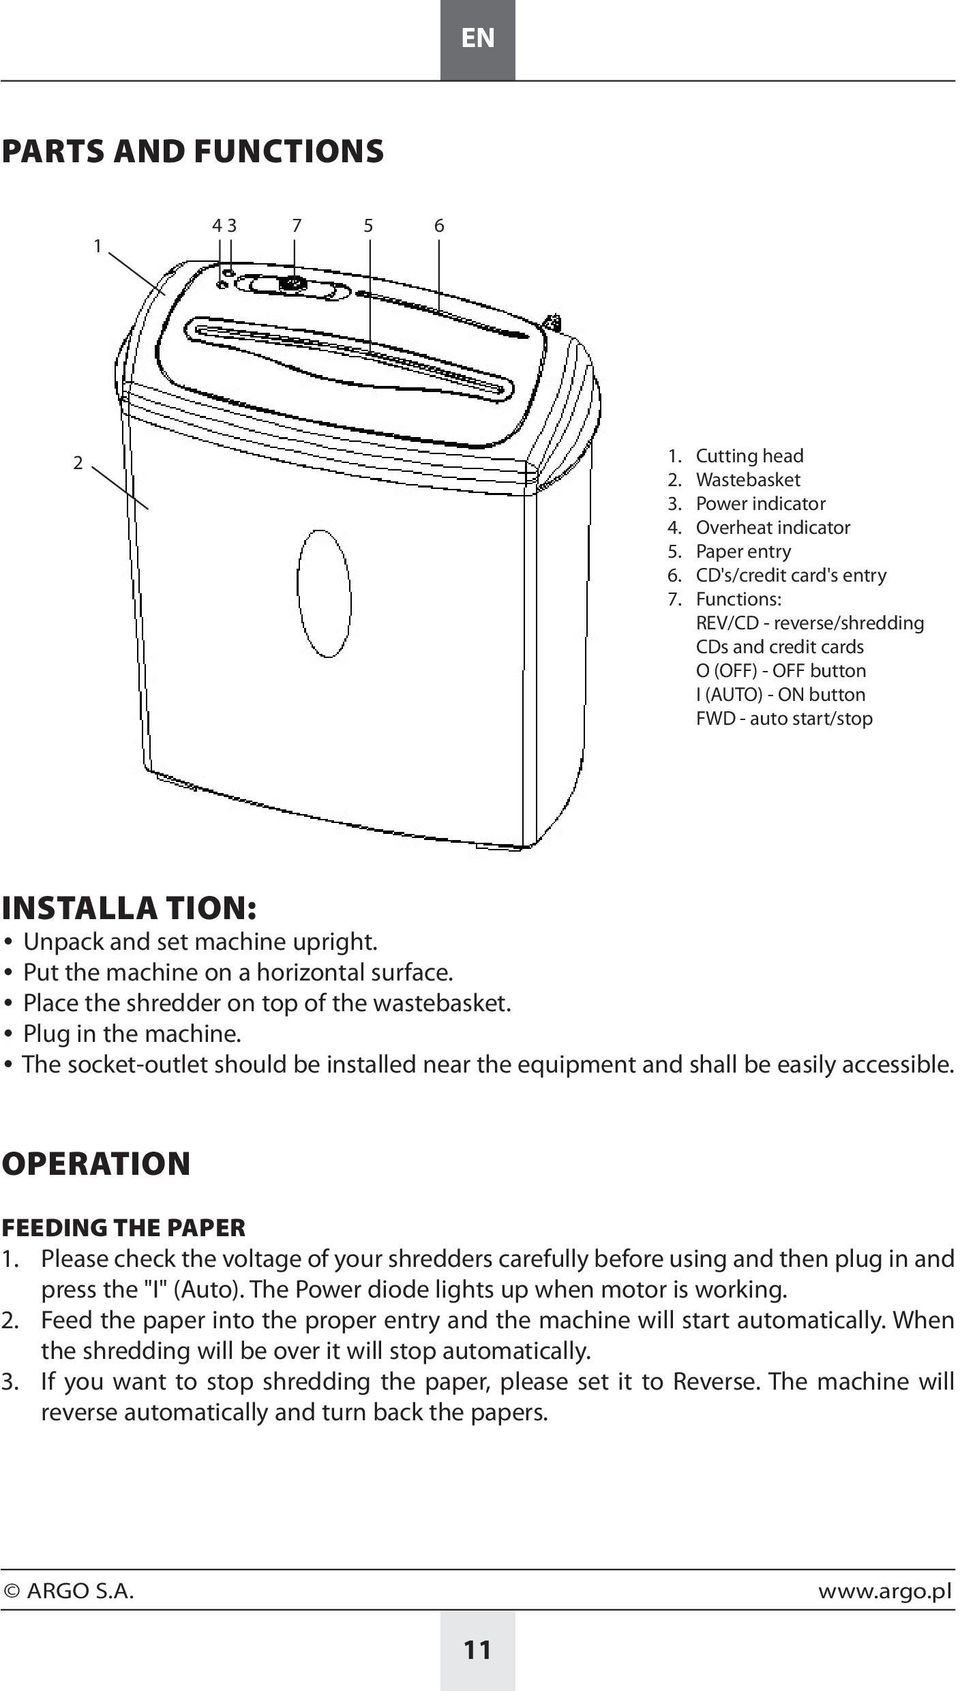 Put the machine on a horizontal surface. Place the shredder on top of the wastebasket. Plug in the machine. The socket-outlet should be installed near the equipment and shall be easily accessible.